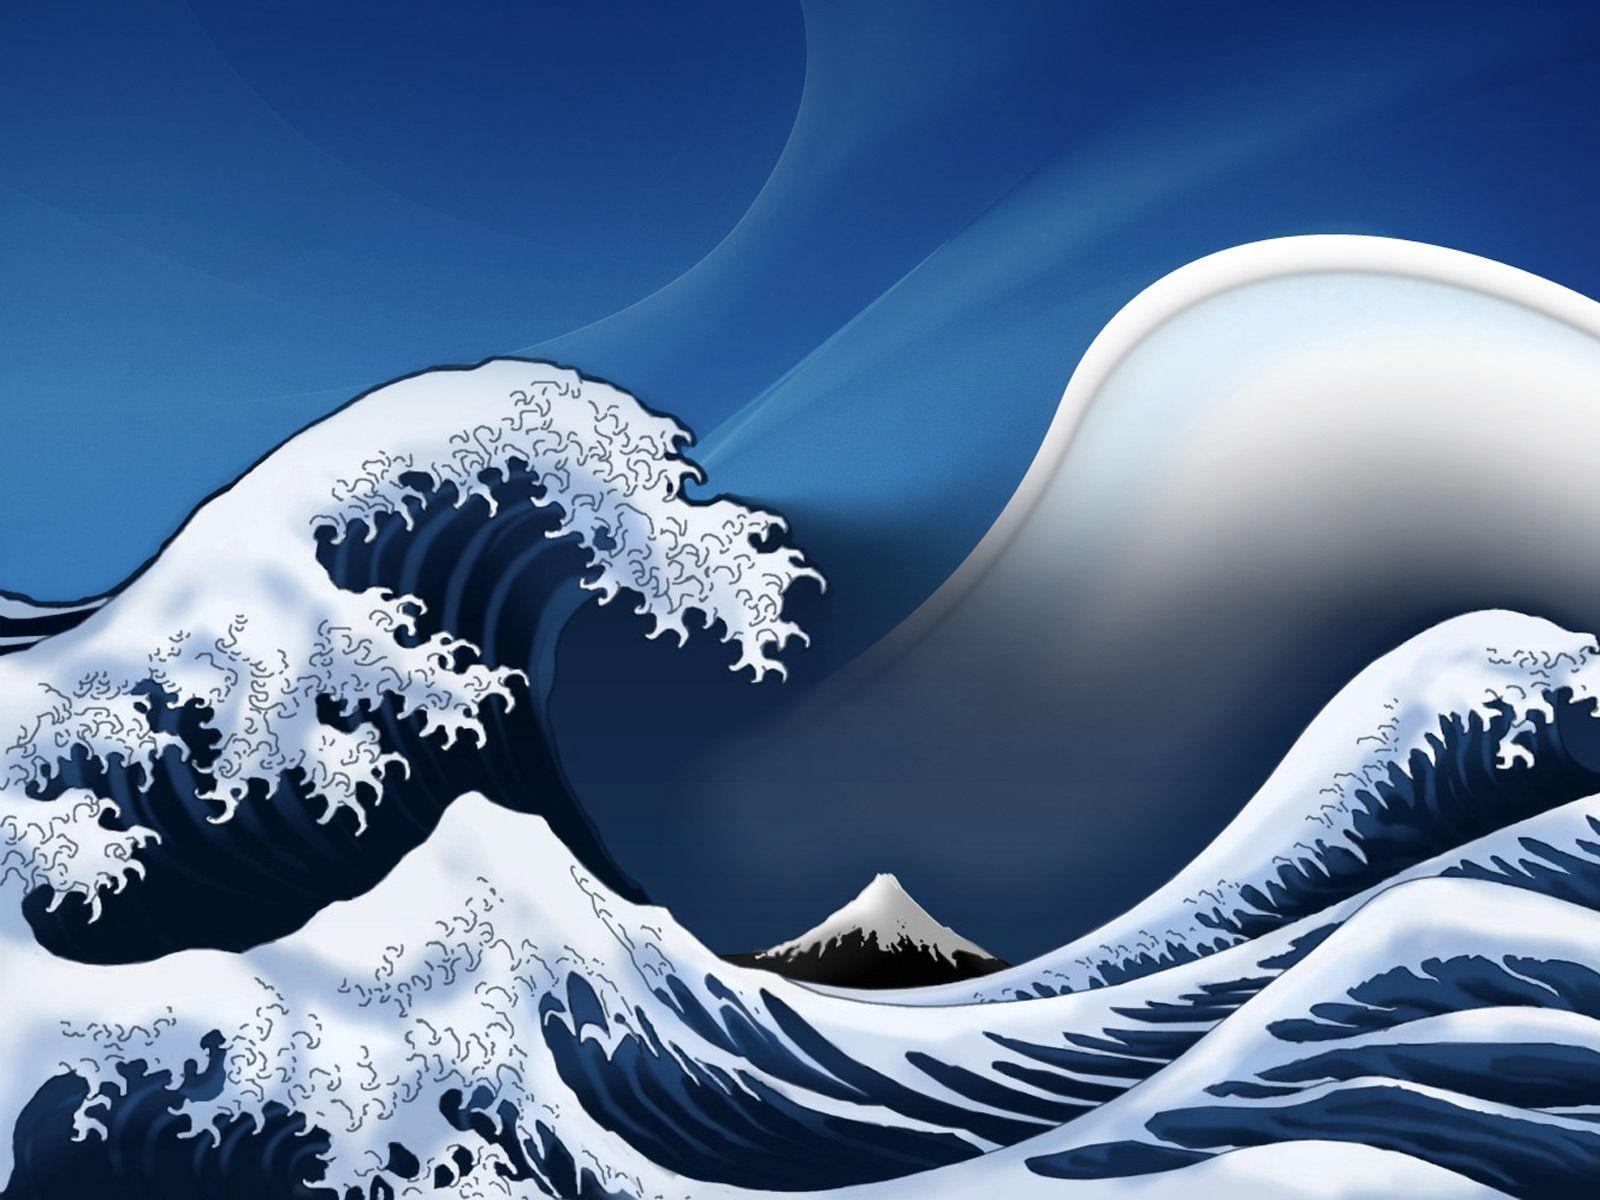 Japan Wave Images  Free Photos PNG Stickers Wallpapers  Backgrounds   rawpixel